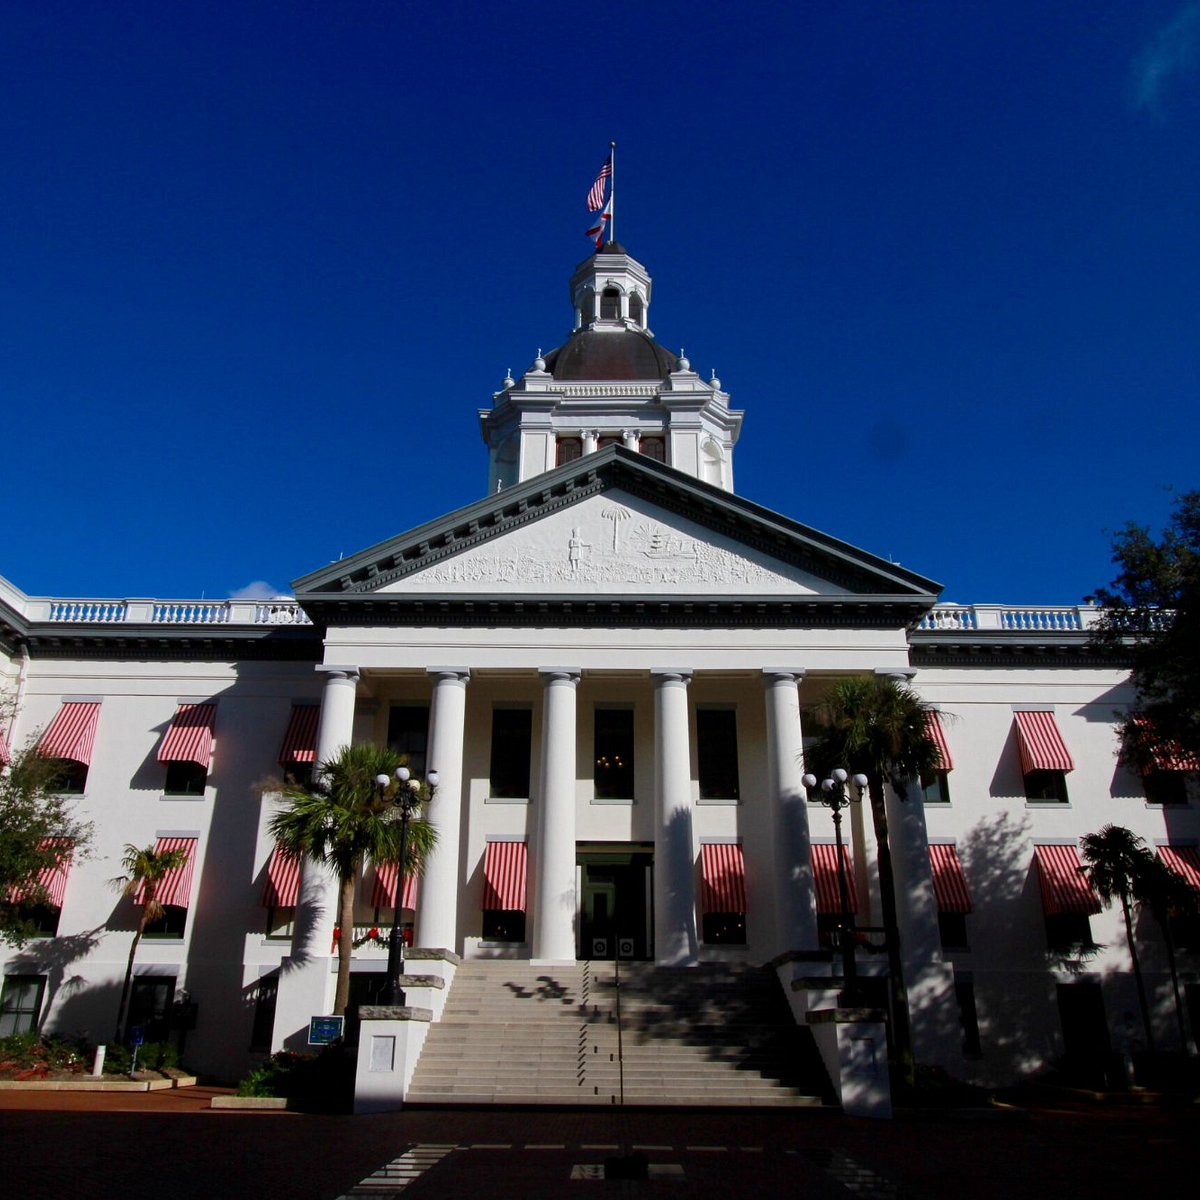 Florida State Capitol Building 탤러해시 Florida State Capitol Building의